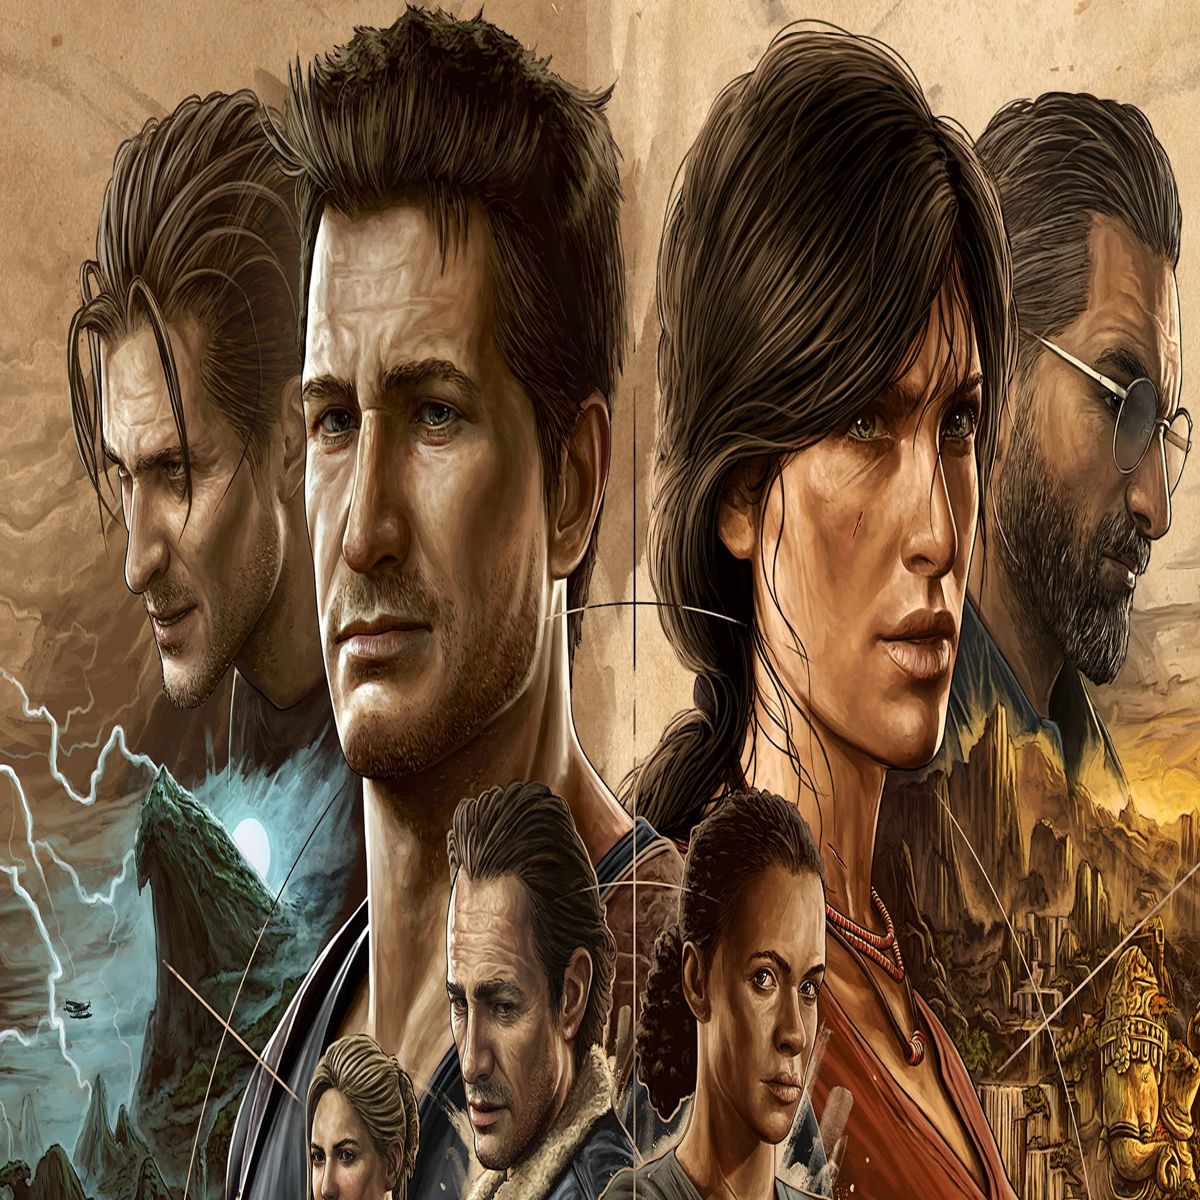 Uncharted: Legacy of Thieves Collection in 2023